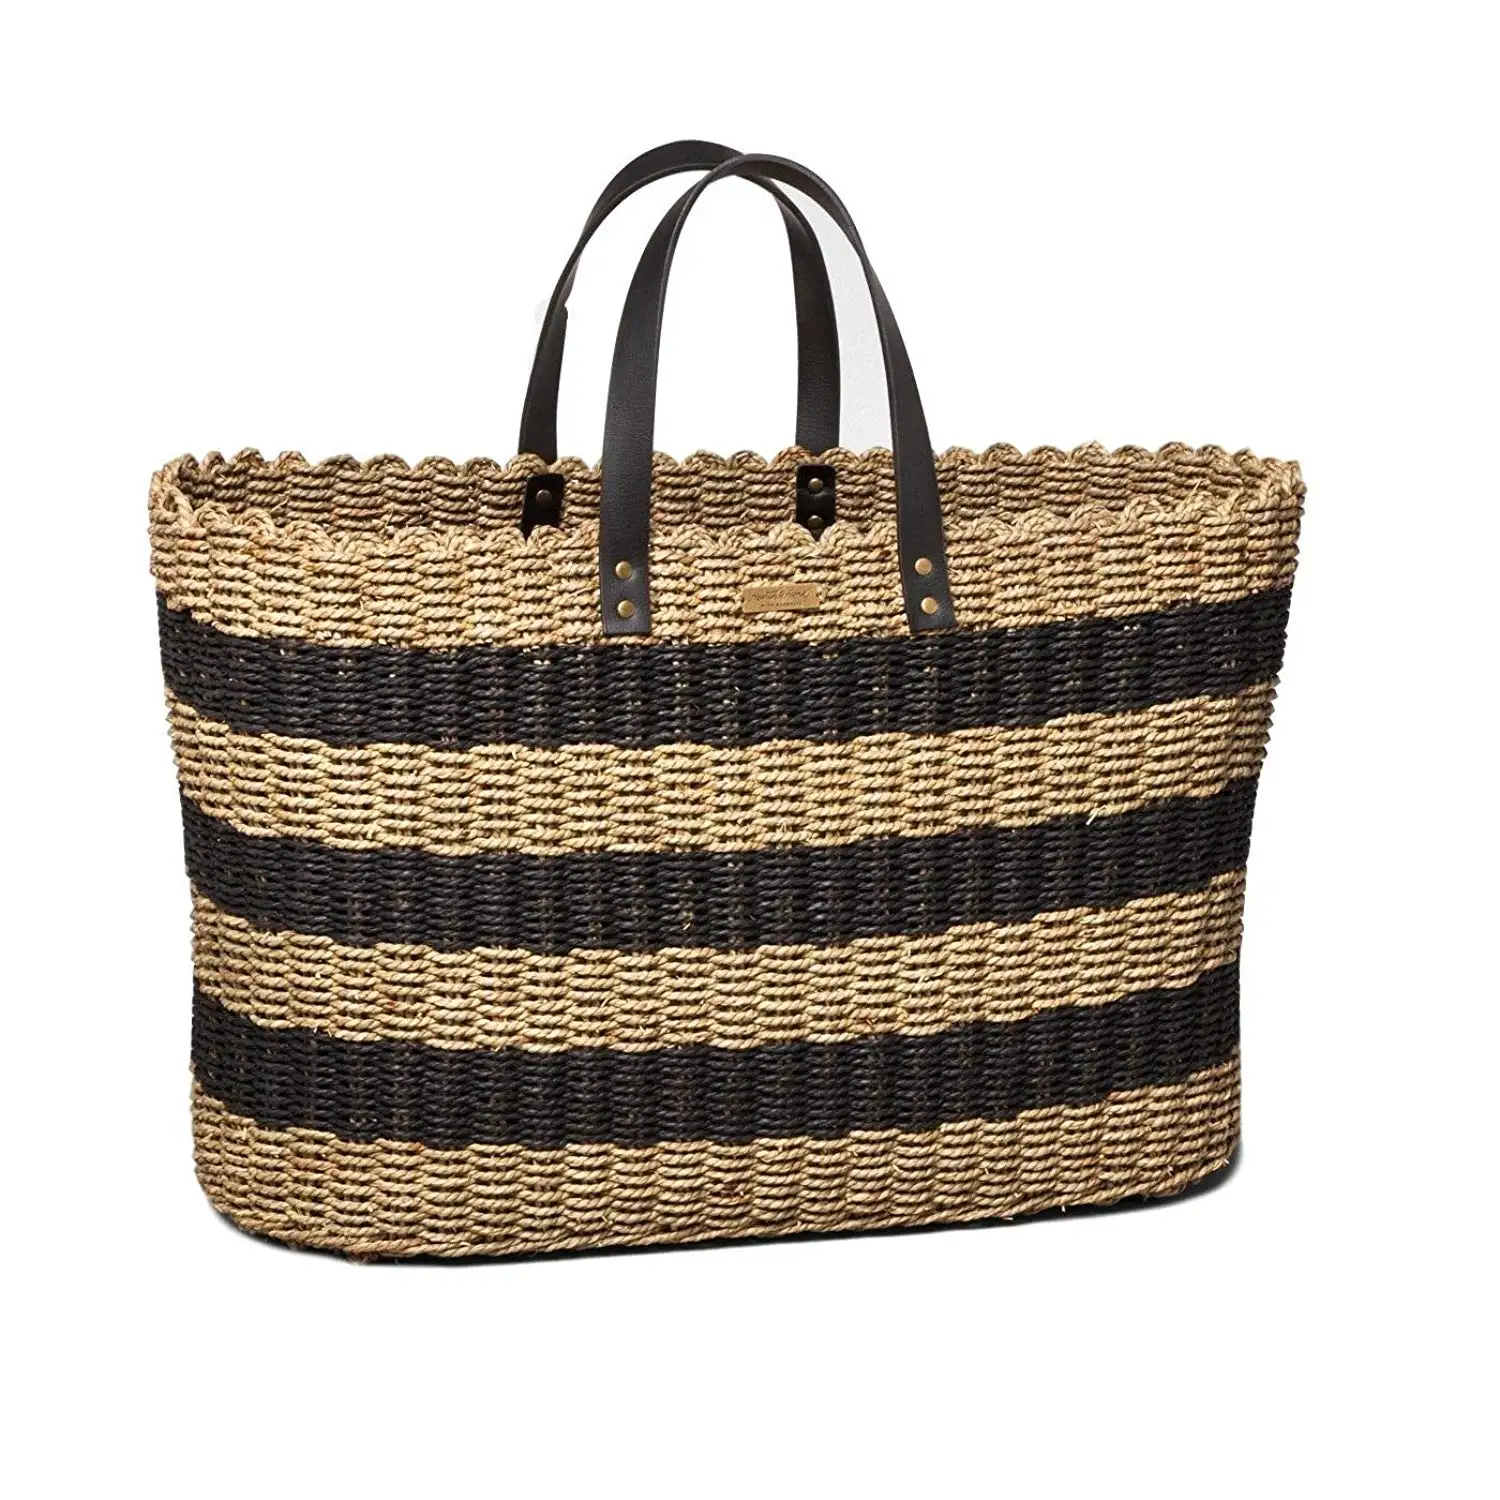 Cheap Seagrass Hand Bag, find Seagrass Hand Bag deals on line at ...